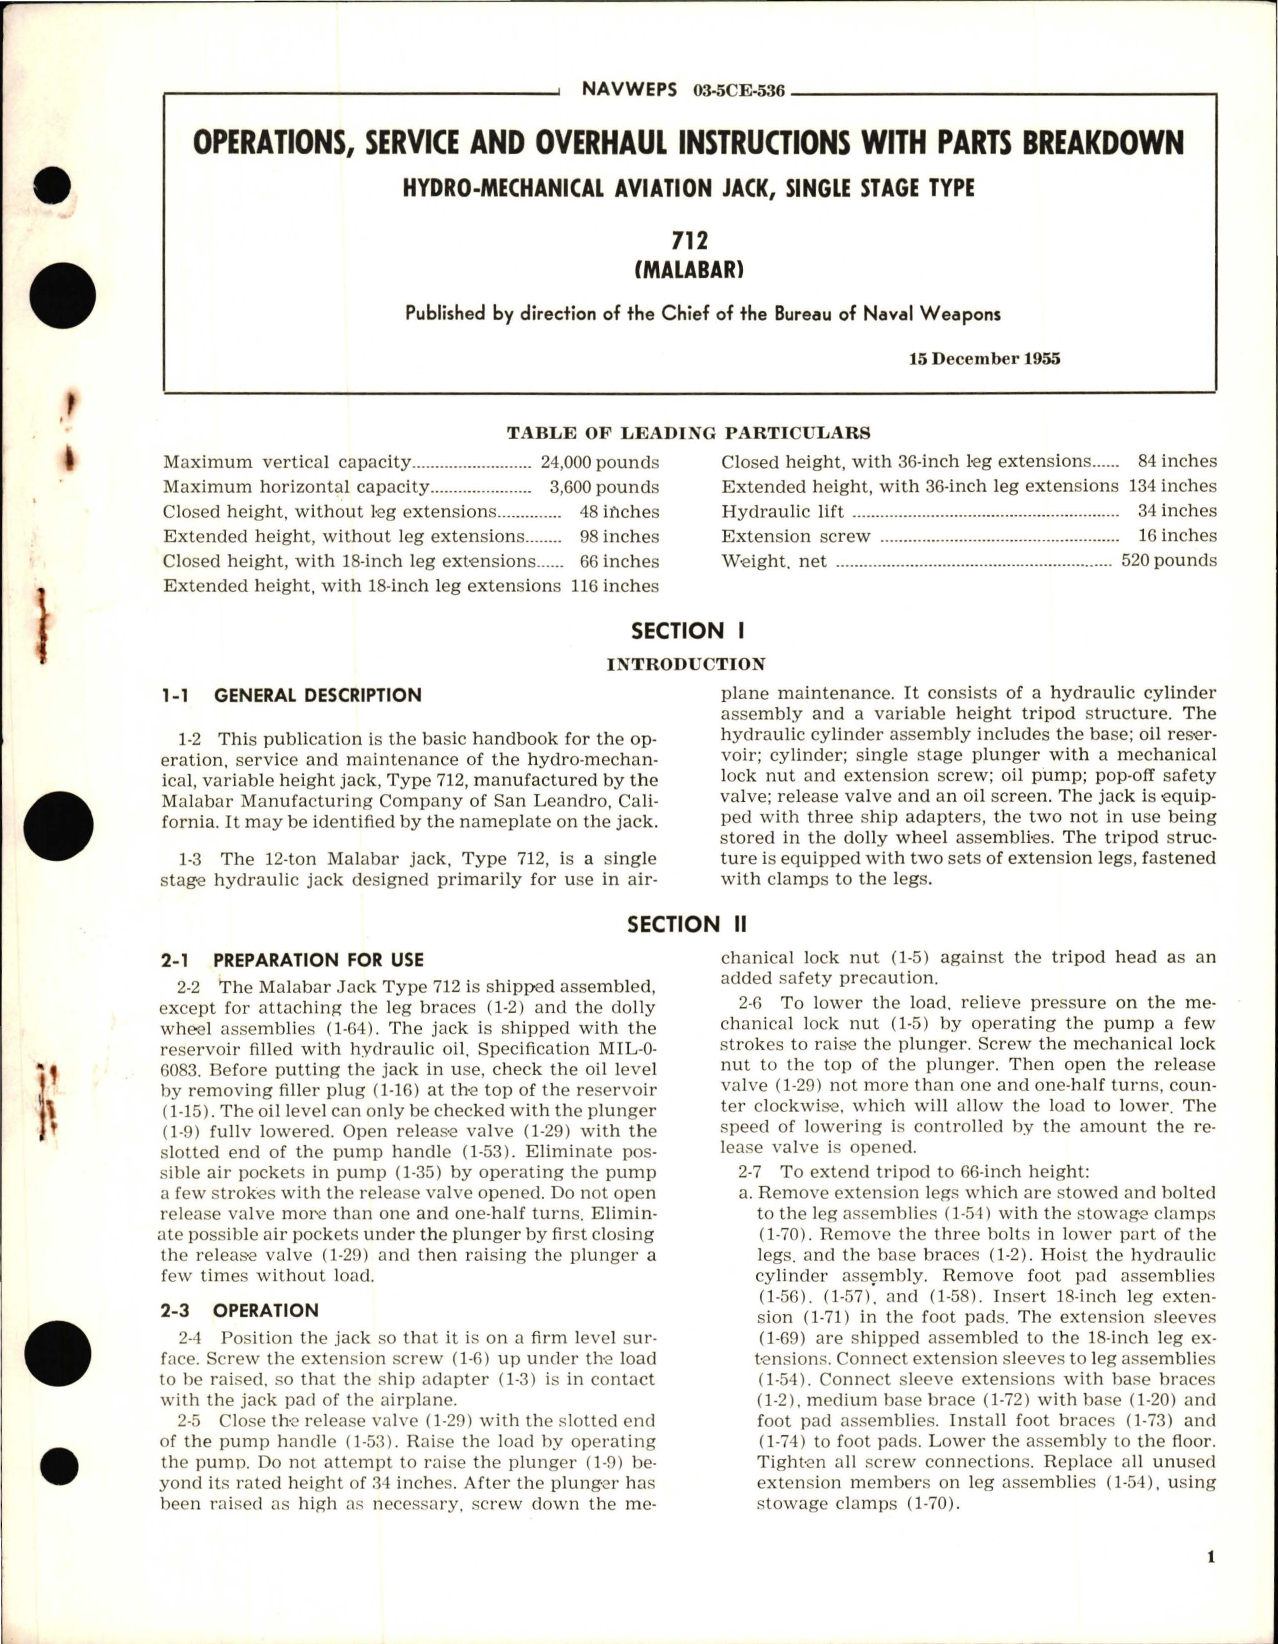 Sample page 1 from AirCorps Library document: Operations, Service and Overhaul Instructions w Parts Breakdown for Hydro Mechanical Aviation Jack, Single Stage Type 712 